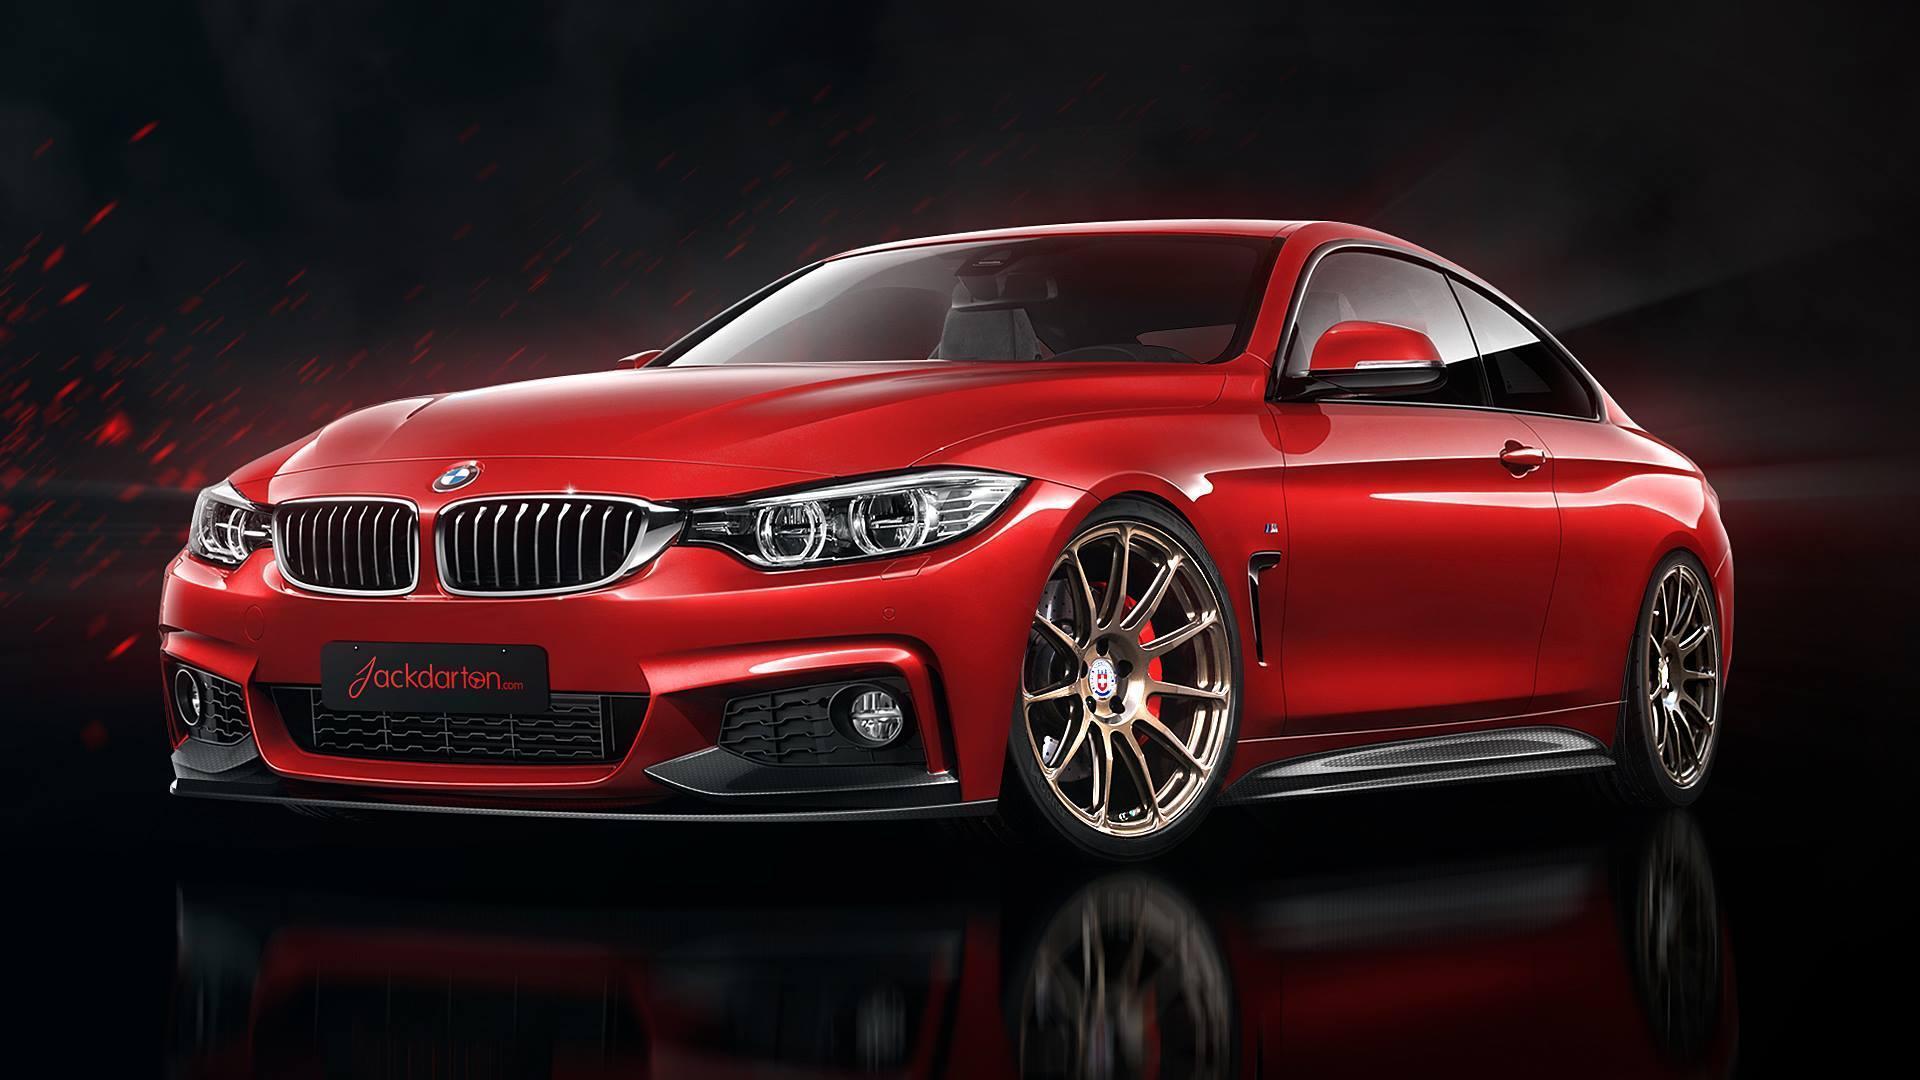 New Red BMW Cars Wallpaper Free Download Wallpaper. High